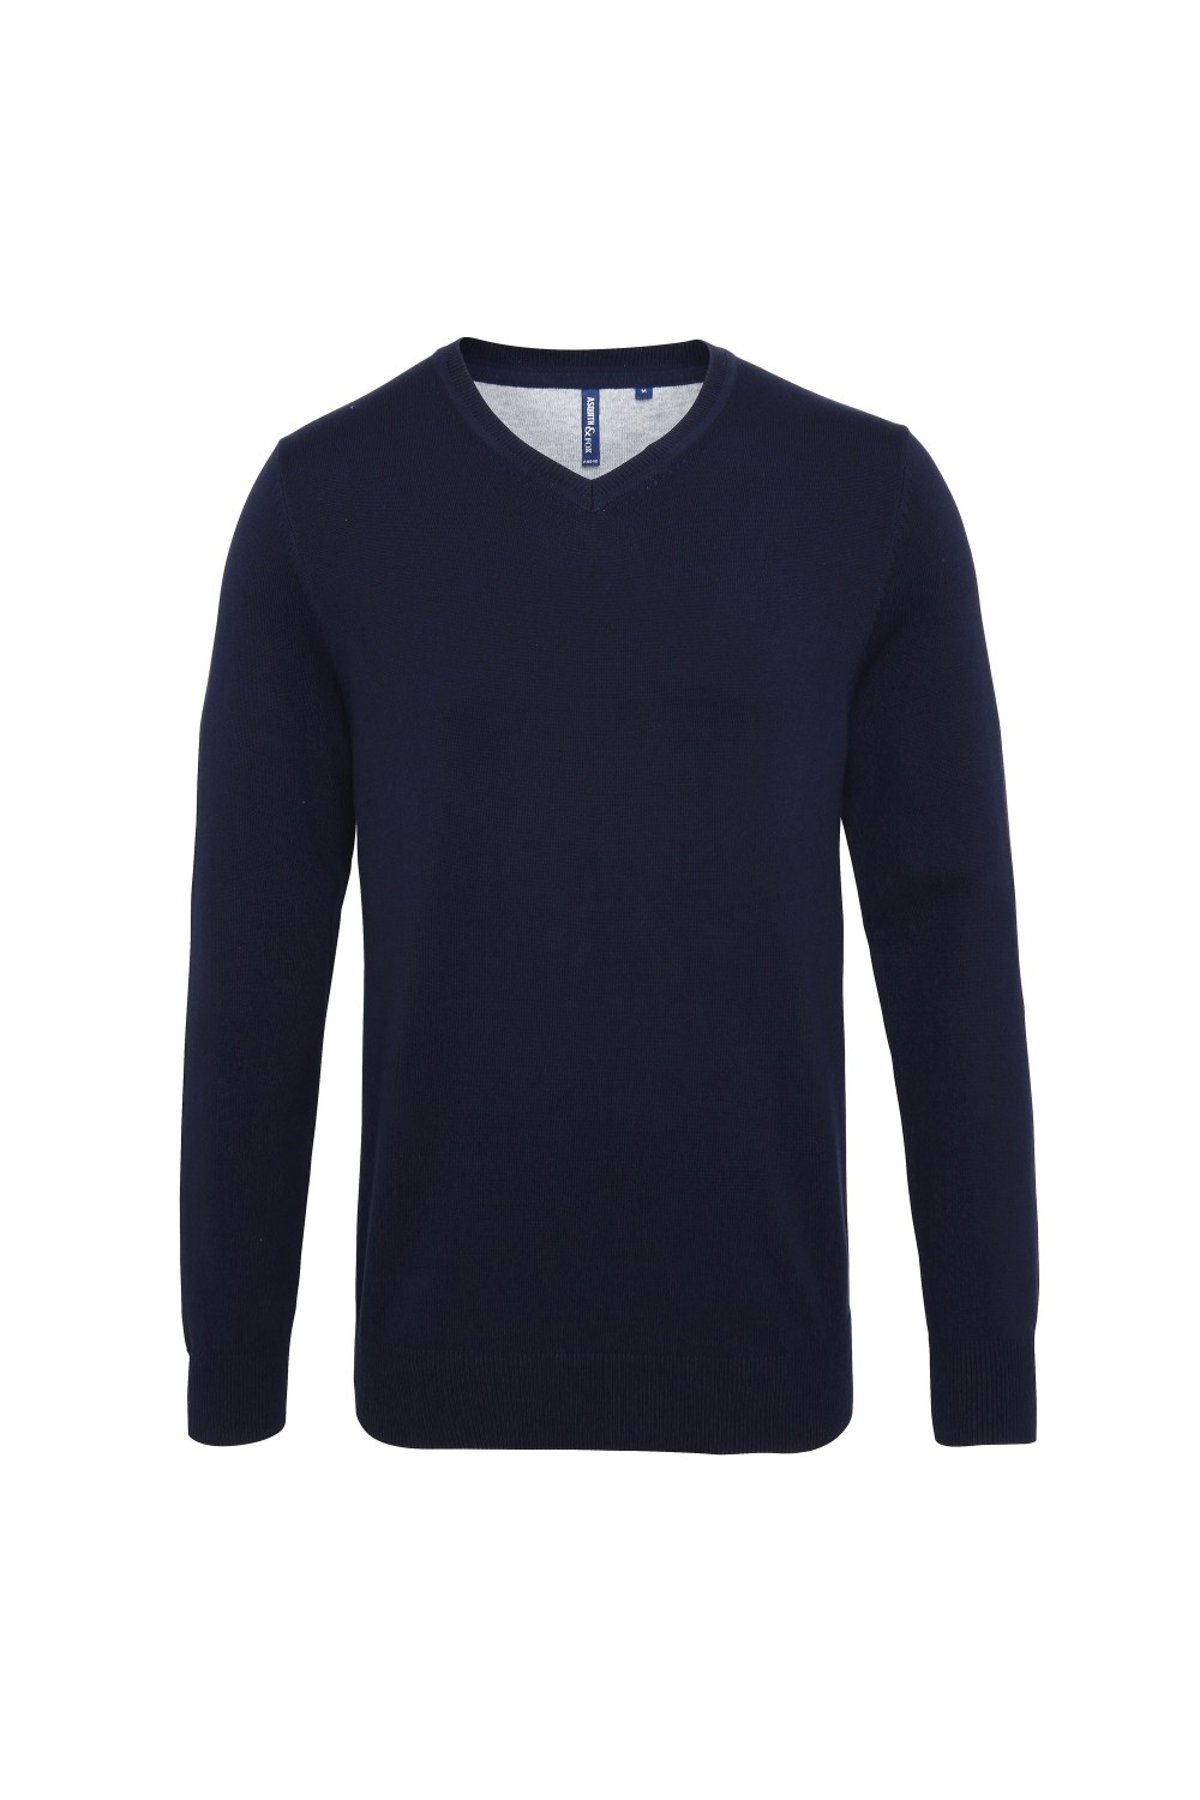 Asquith & Fox Mens Cotton Rich V-Neck Sweater - French Navy